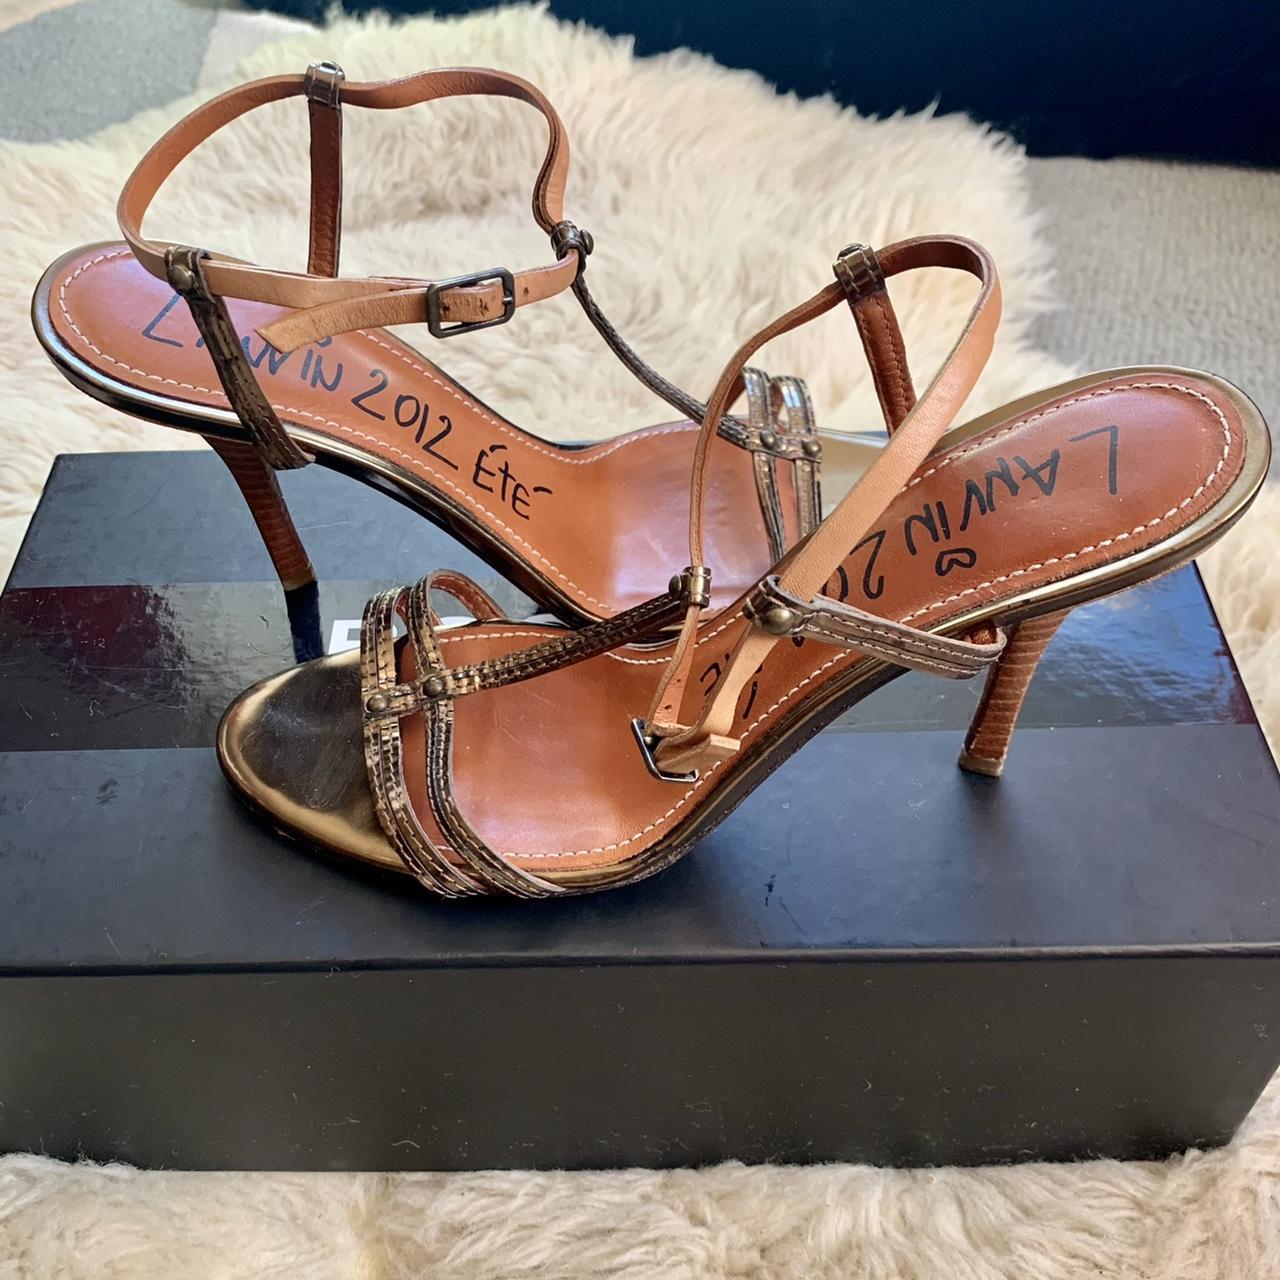 Lanvin Women's Tan and Gold Sandals